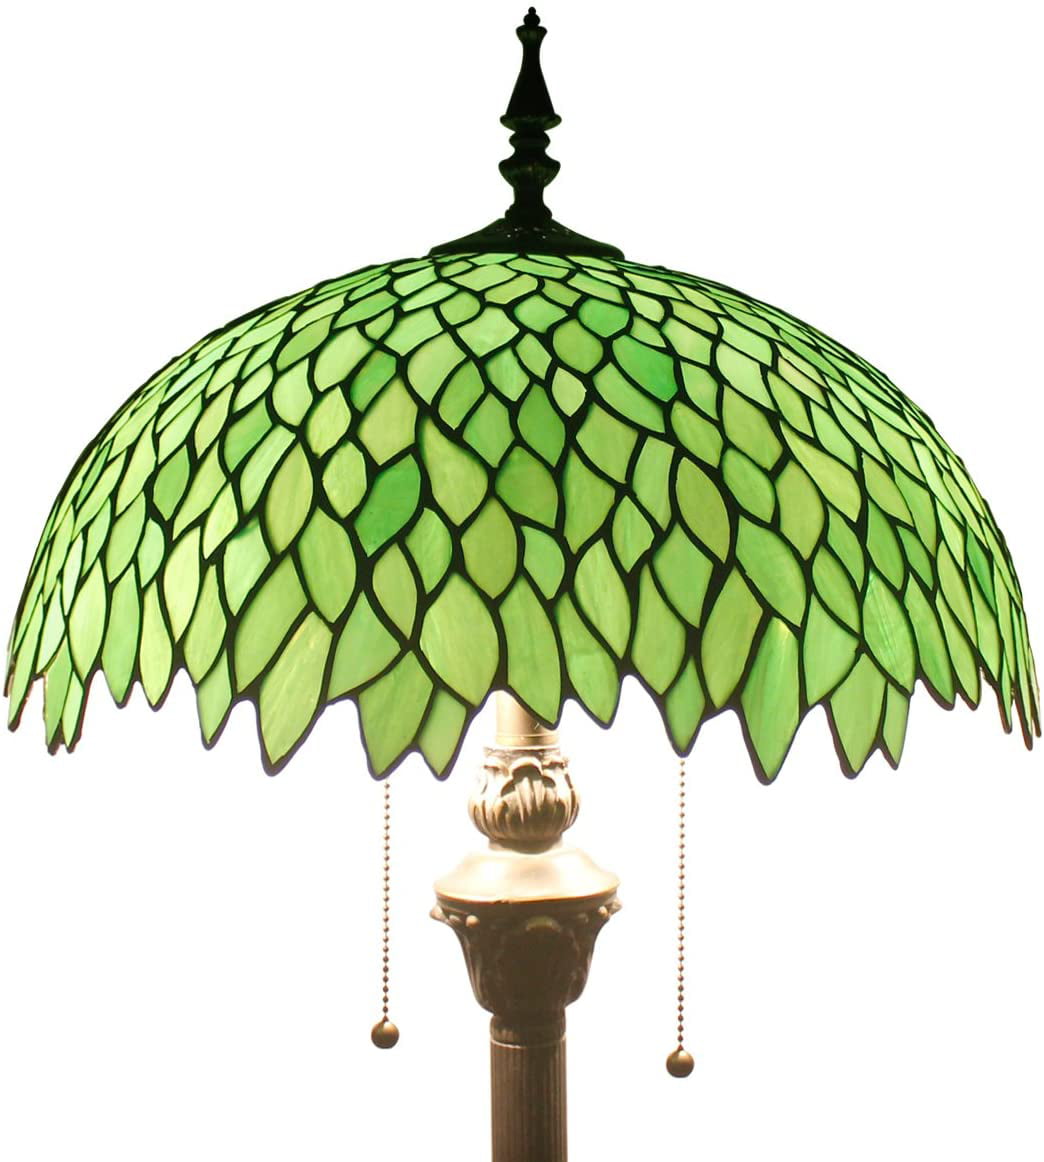 BBNBDMZ  Floor Lamp Green Wisteria Stained Glass Standing Reading Light 16X16X64 Inches Antique Style Pole Corner Lamp Decor Bedroom Living Room  Office S523 Series